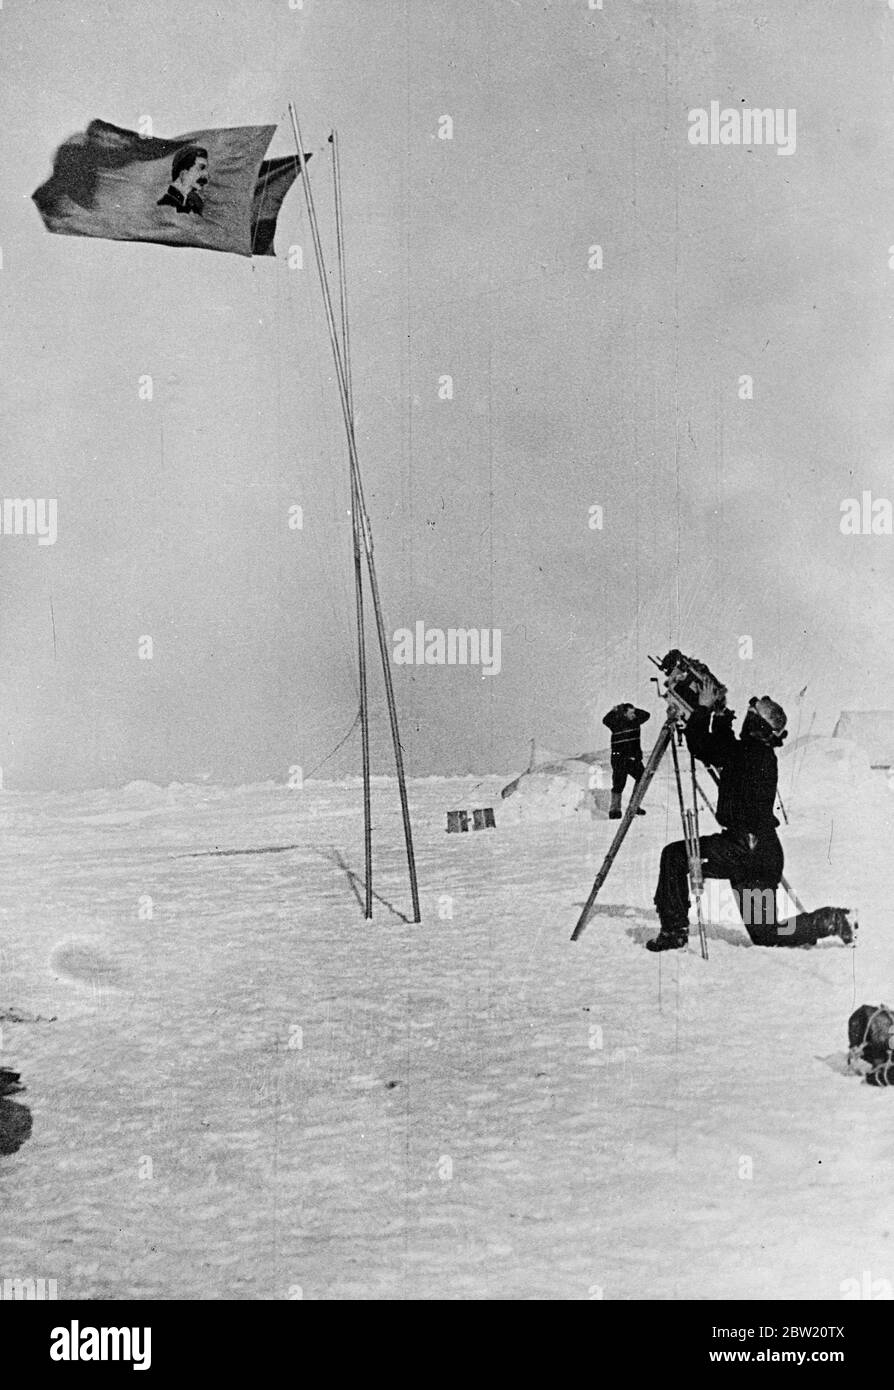 These pictures, the first ever made at the North Pole, were flown to Moscow and from there to London. The Soviet scientific expedition led by Professor Otto Schmidt has succeeded in establishing on an ice floe in the frozen wilderness from which valuable scientific information and regular weather reports are now being sent by radio for the first time in history. A flag bearing a portrait of Stalin and the flag of the Soviet Union fluttering side-by-side at the North Pole. A member of the expedition is seen operating a cine camera. 28 June 1937 Stock Photo